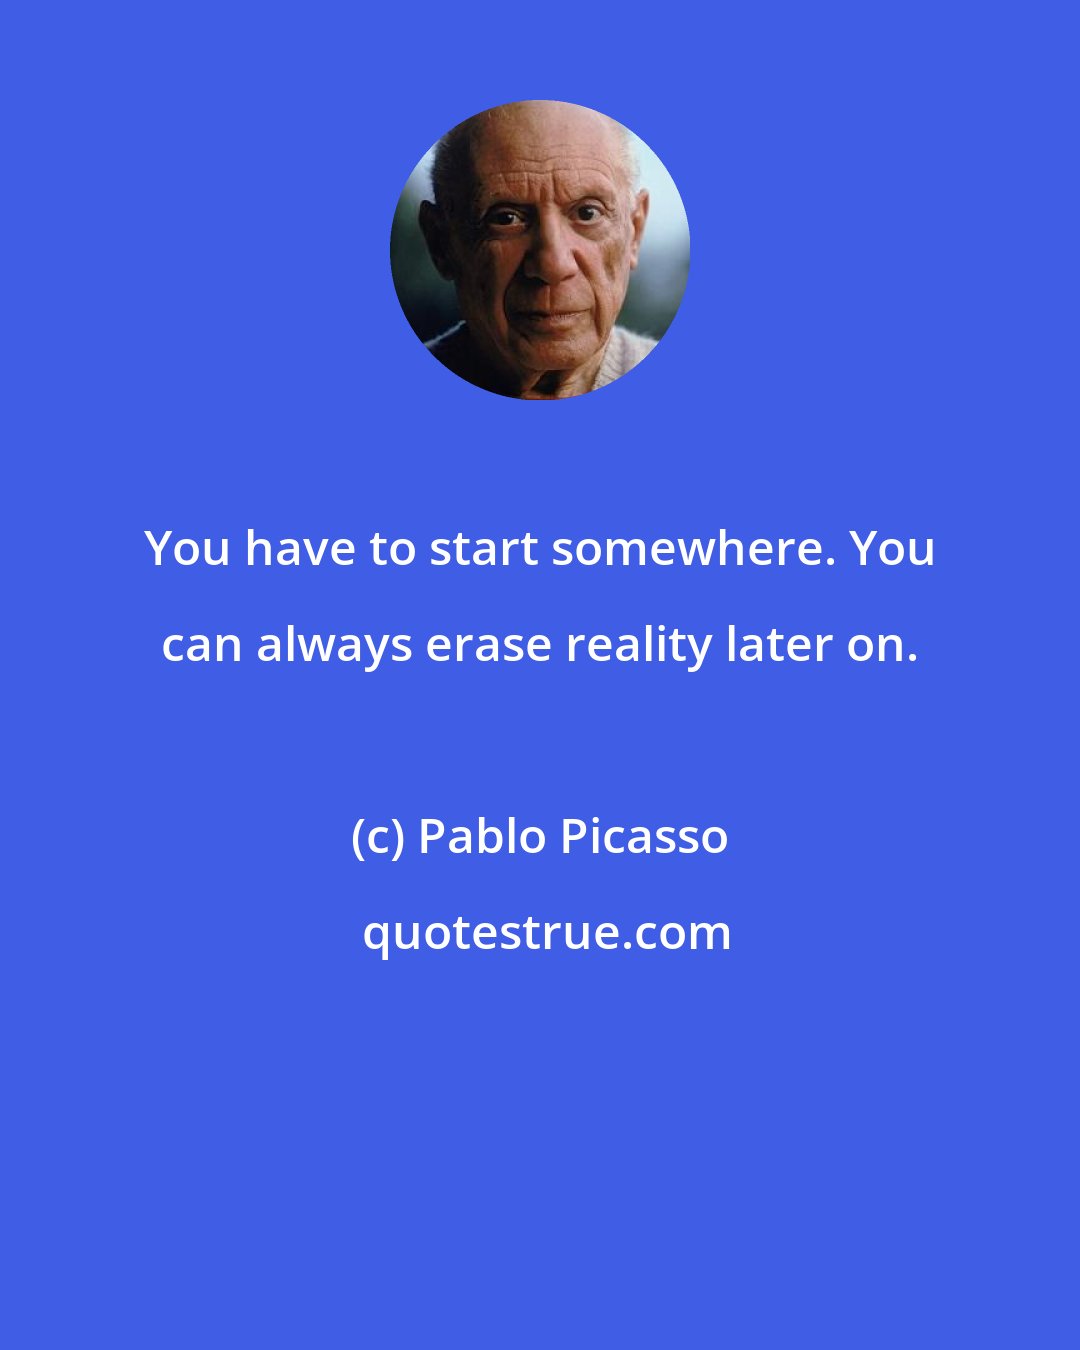 Pablo Picasso: You have to start somewhere. You can always erase reality later on.